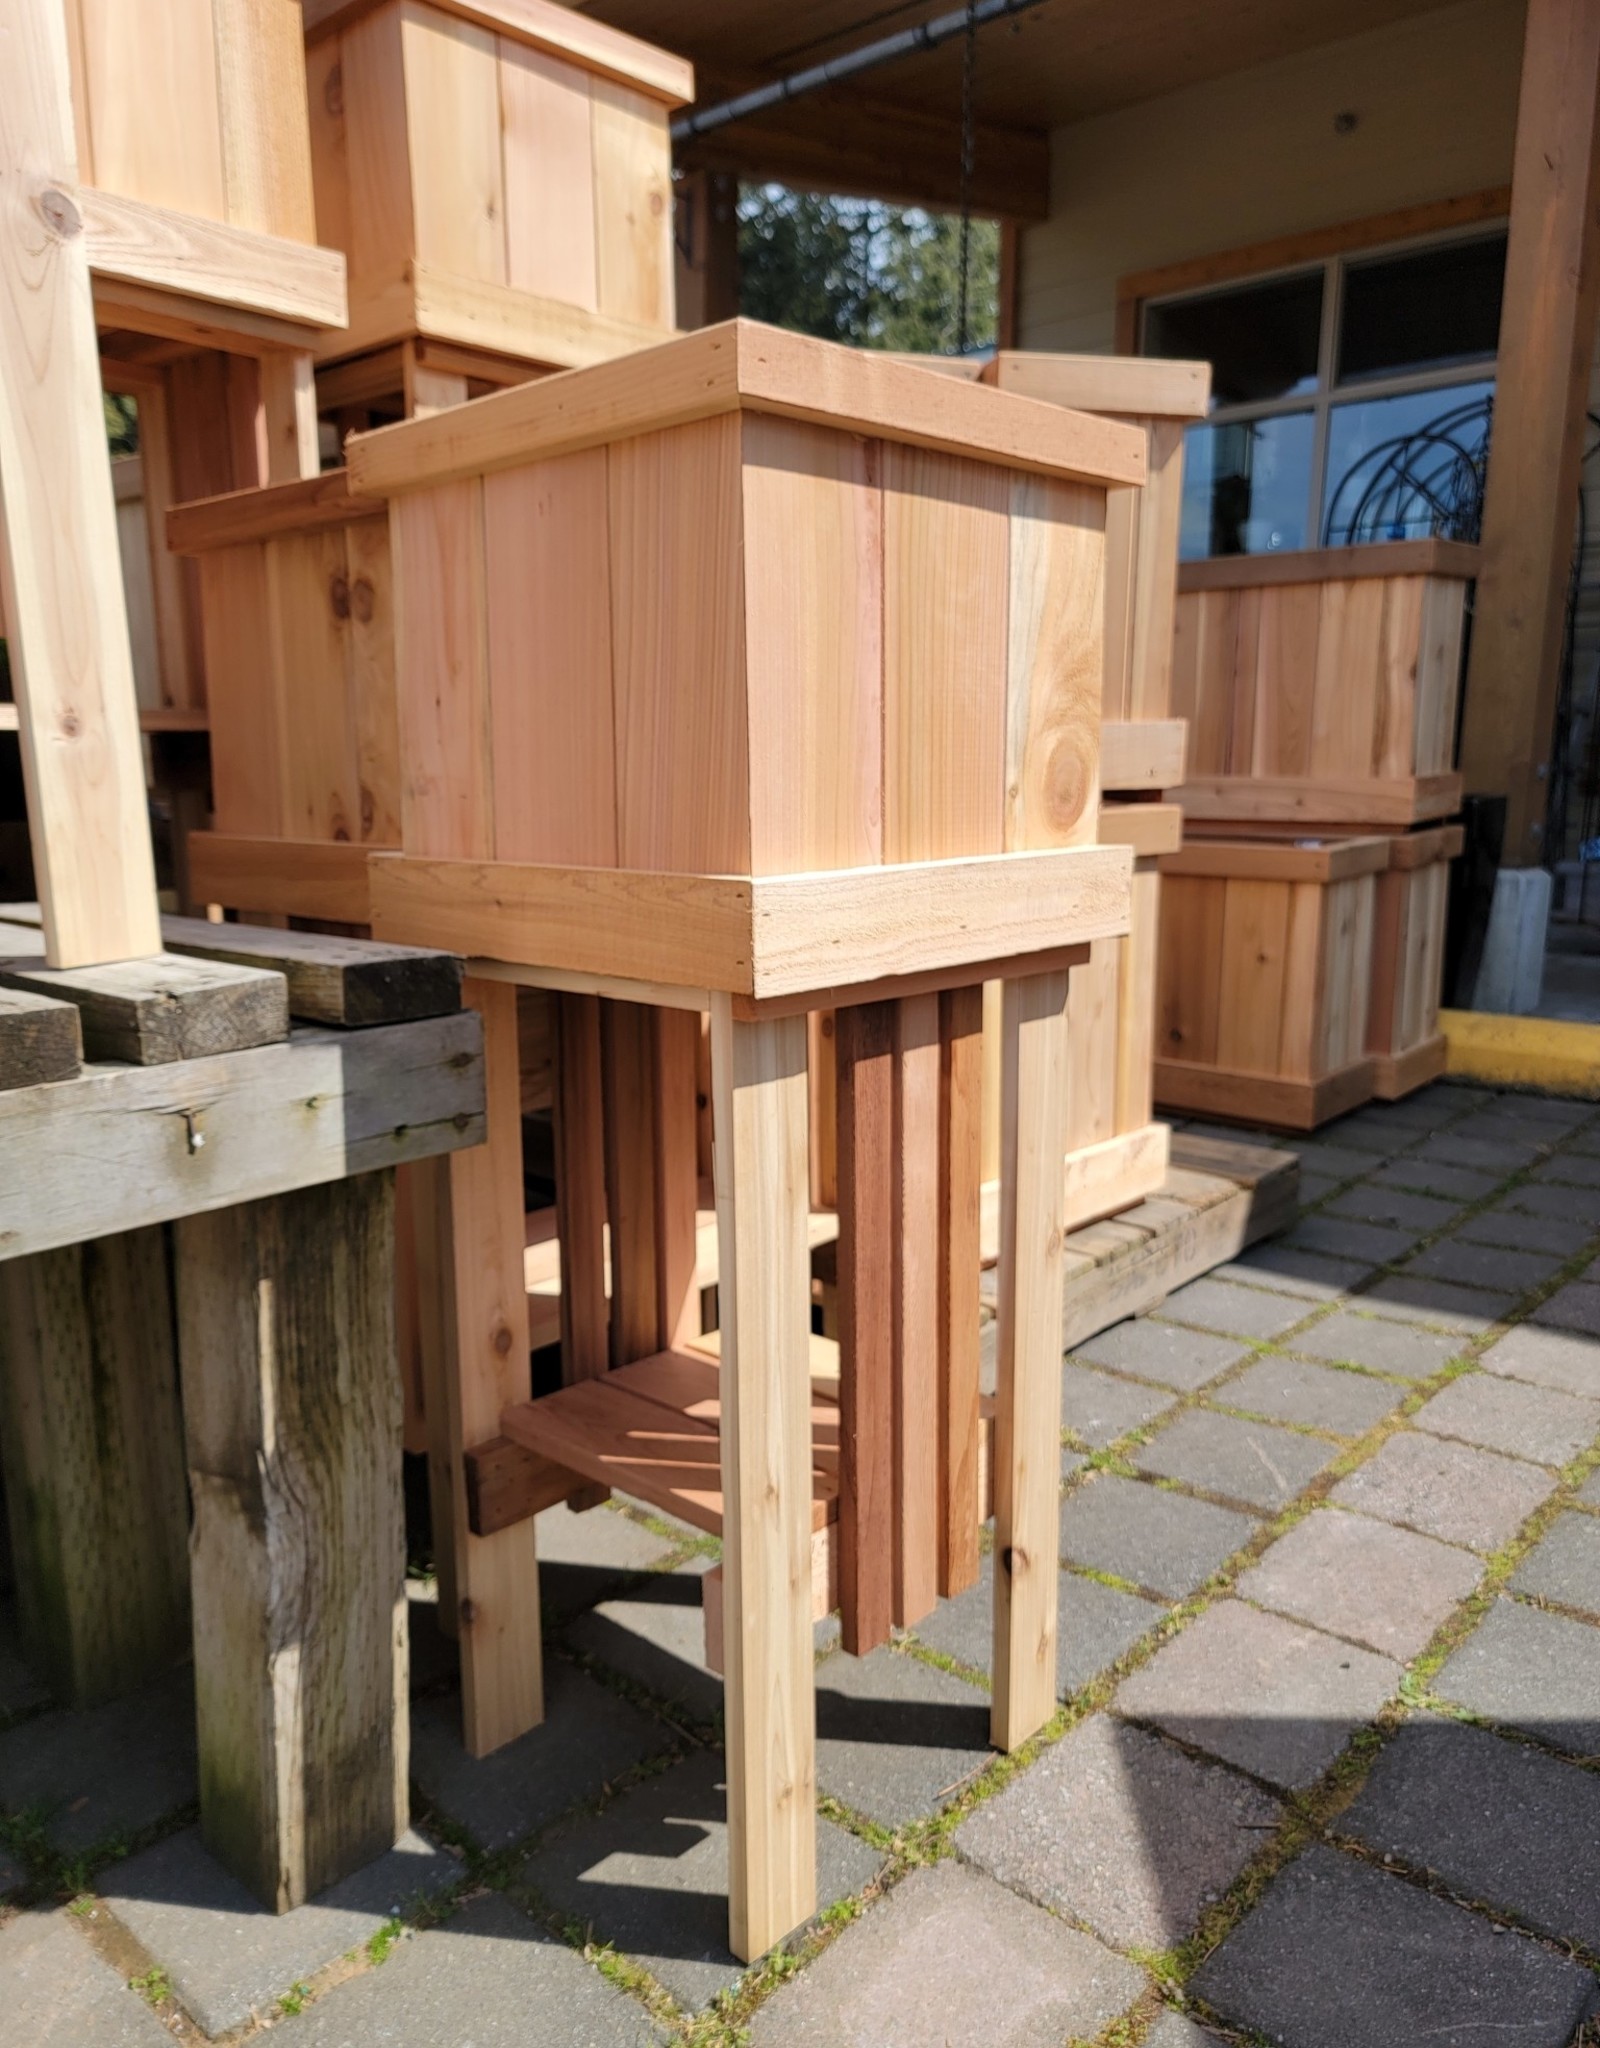 Cedar Planter Boxes 16 x 16 x 16 With Stand